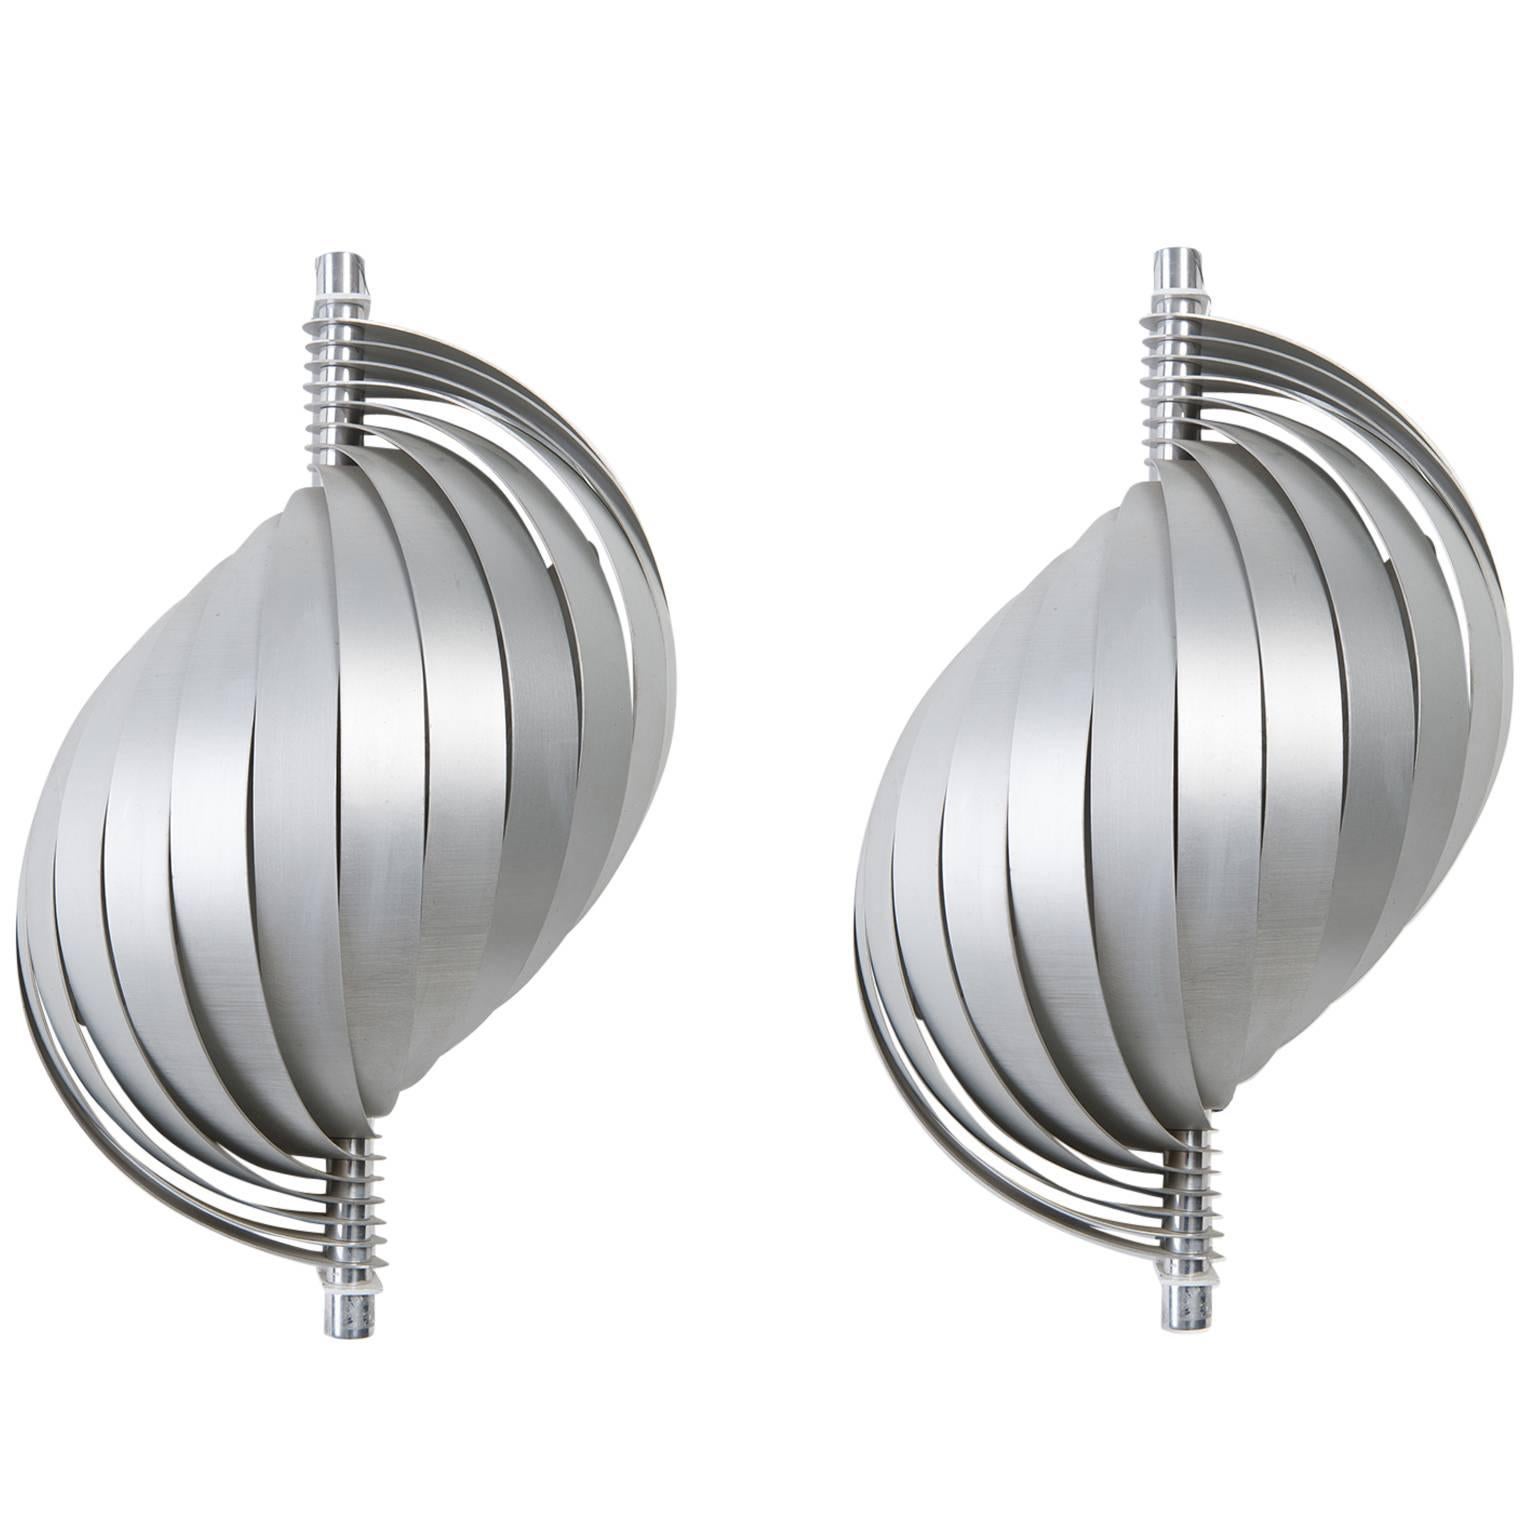  Modern Design Aluminium Sconces or Wall Lamps  For Sale